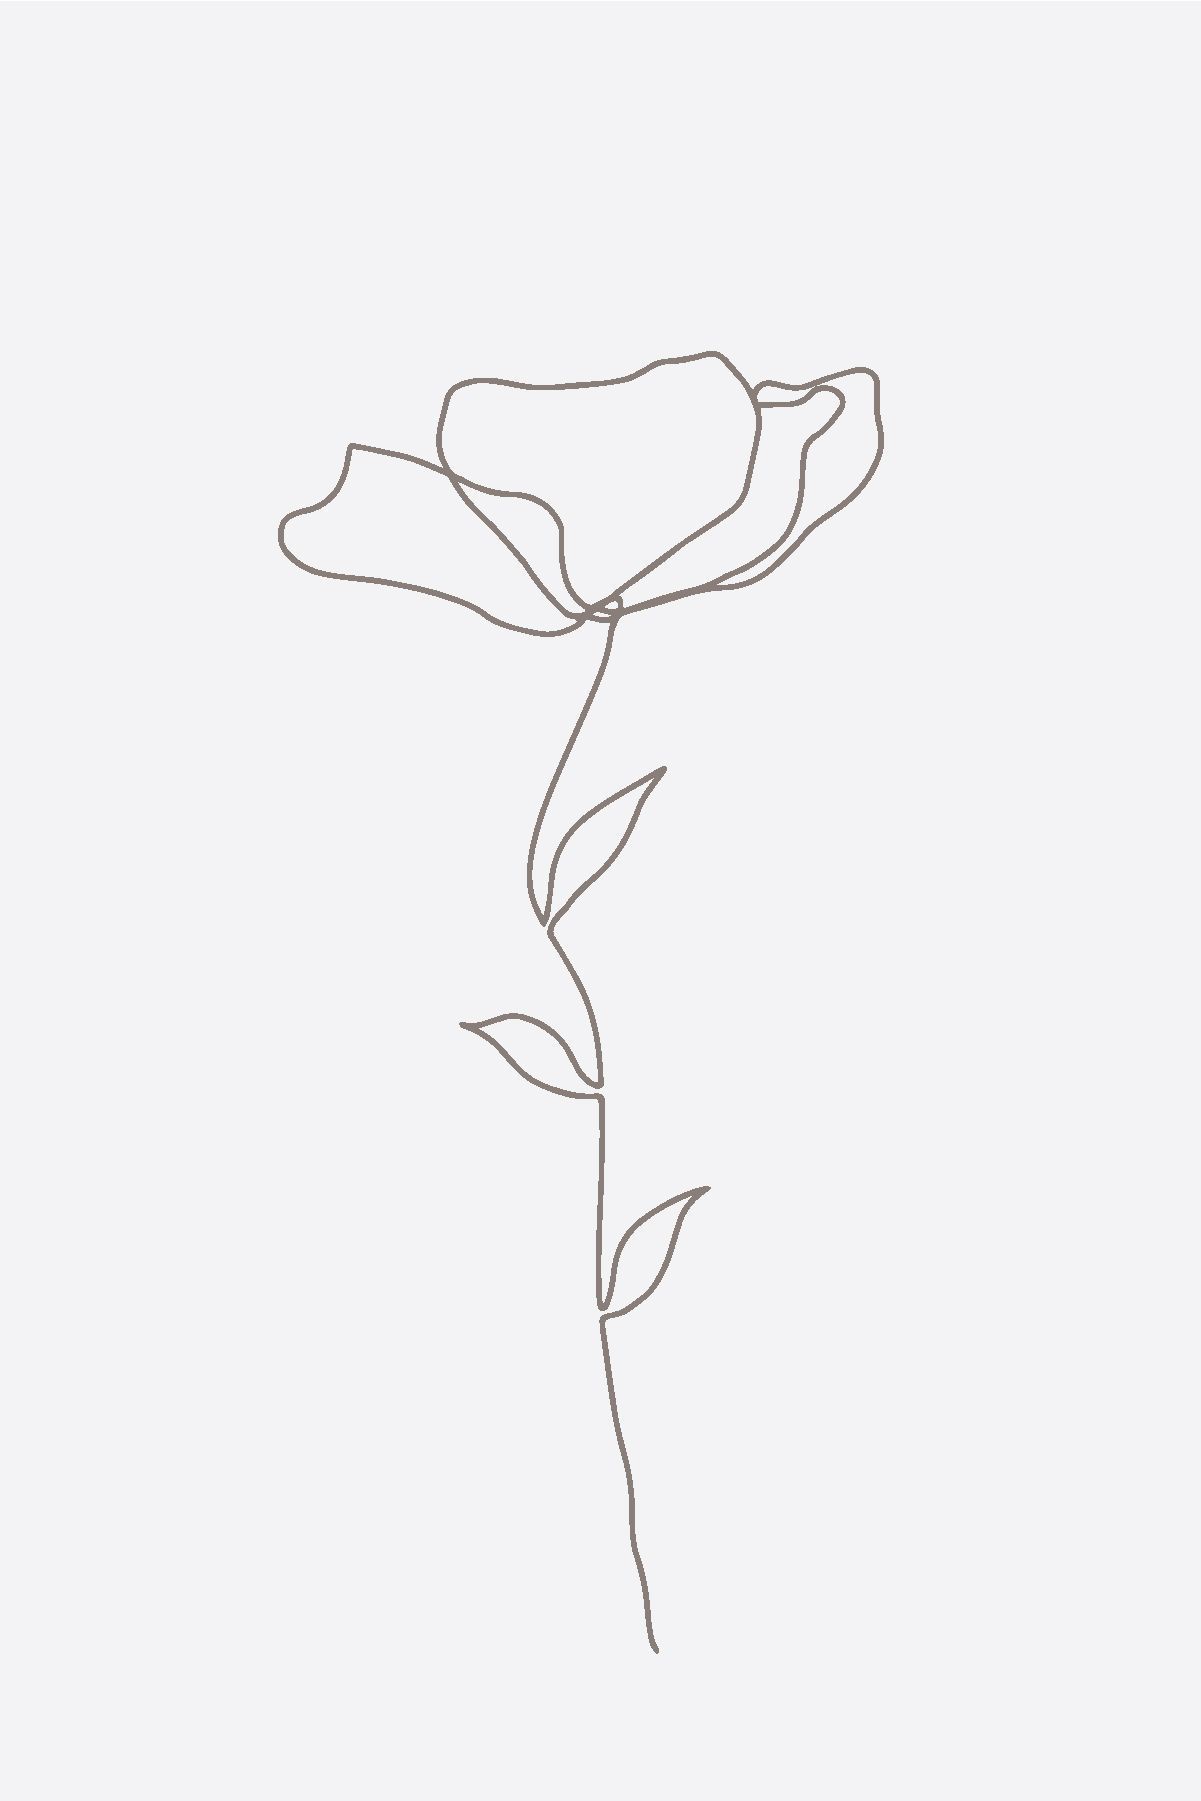 Minimalist Flowers Drawing Wallpapers - Wallpaper Cave